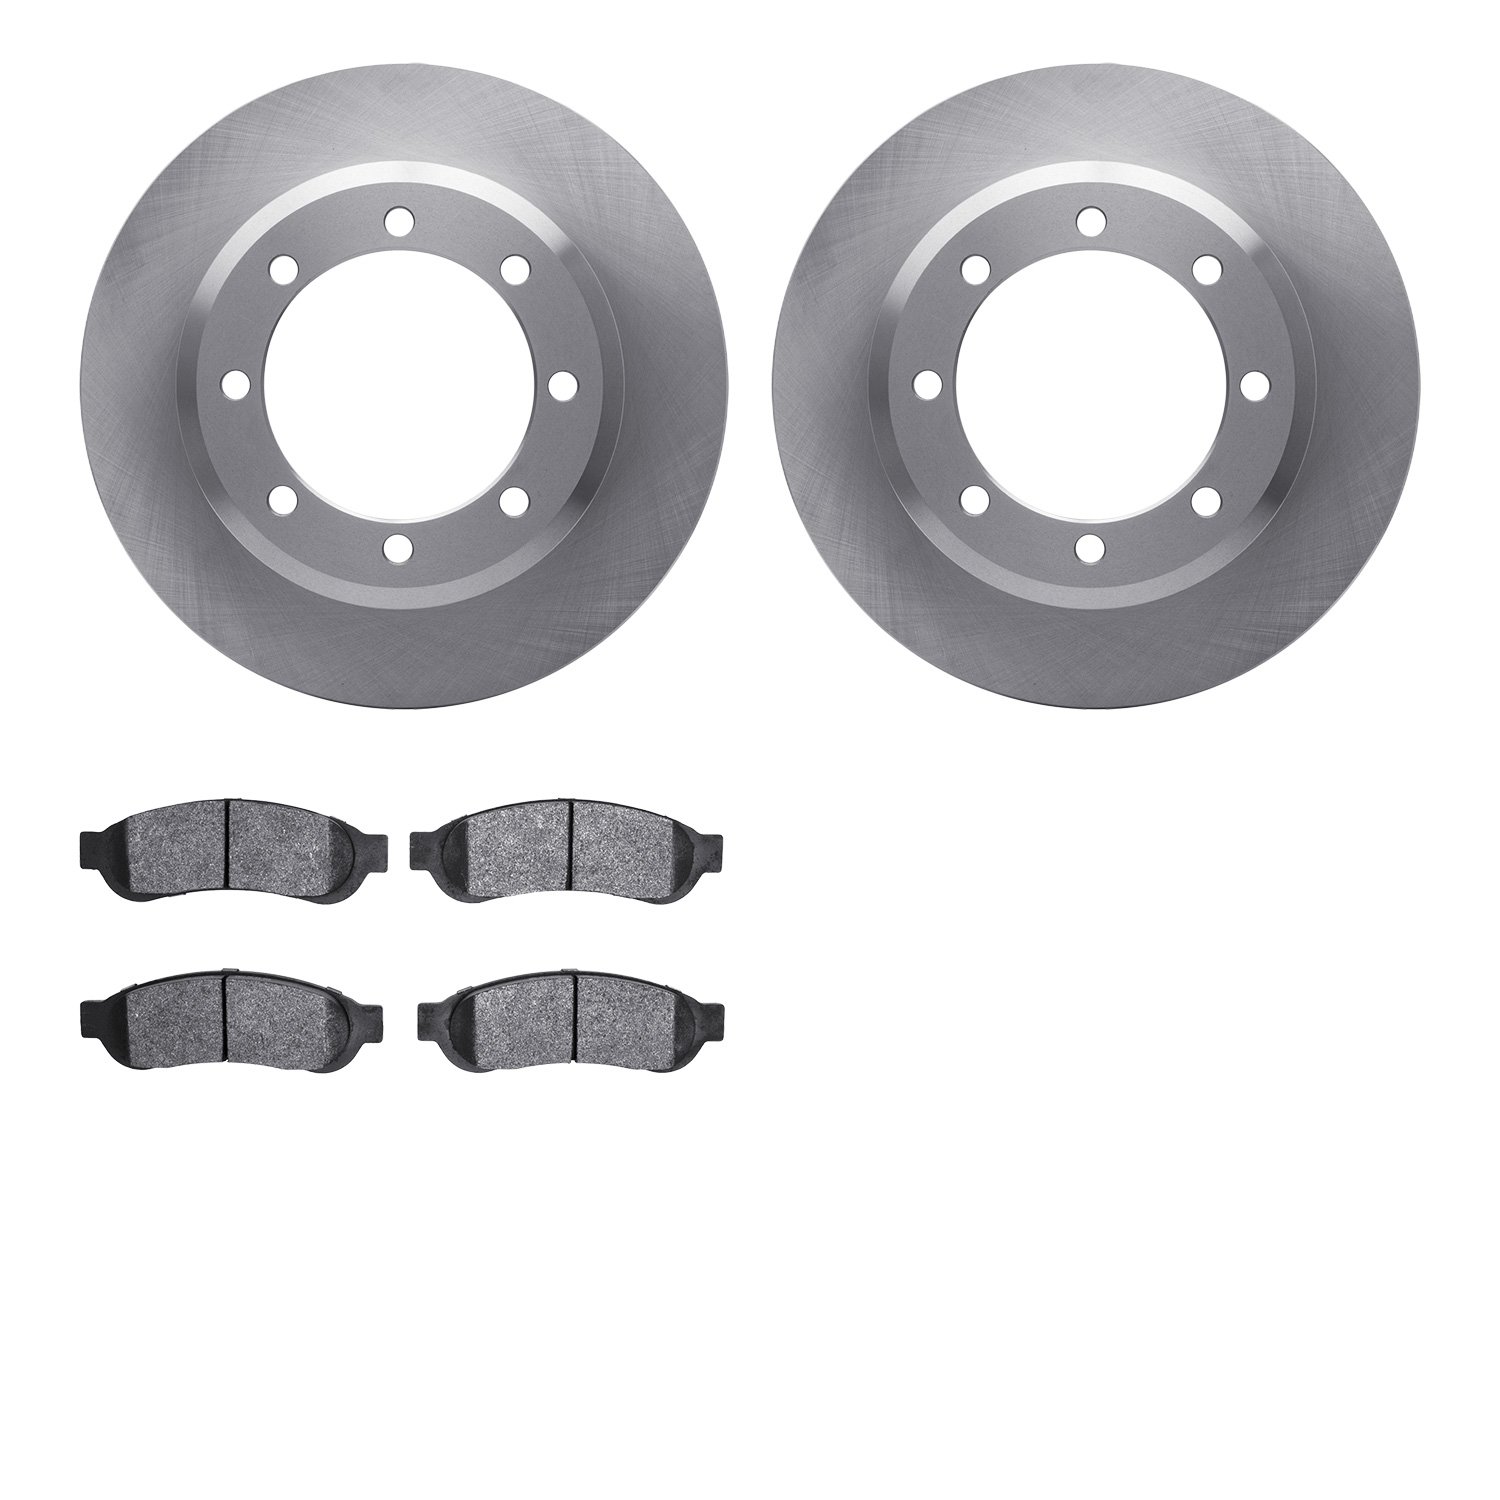 6402-54251 Brake Rotors with Ultimate-Duty Brake Pads, 2005-2010 Ford/Lincoln/Mercury/Mazda, Position: Rear